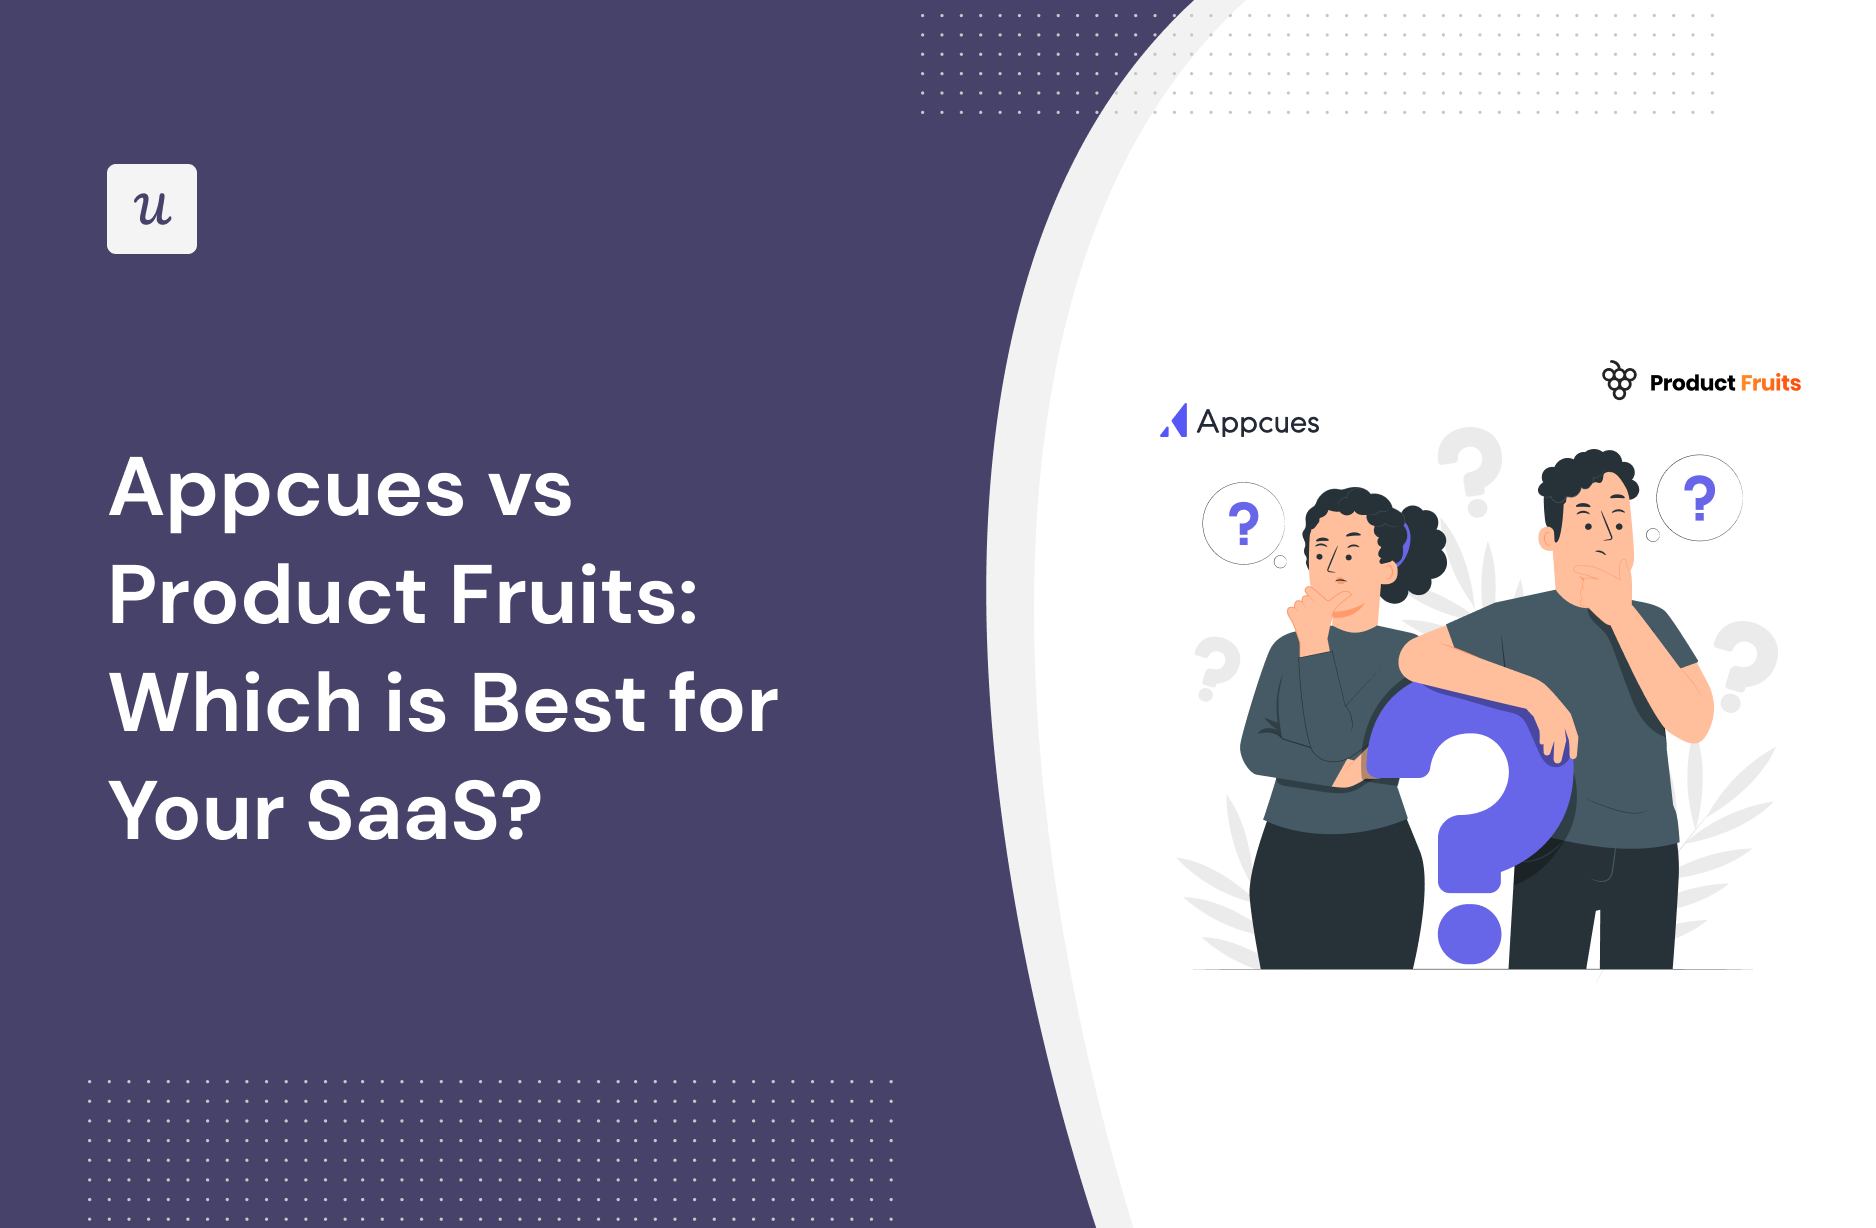 Appcues vs Product Fruits: Which is Best for Your SaaS?